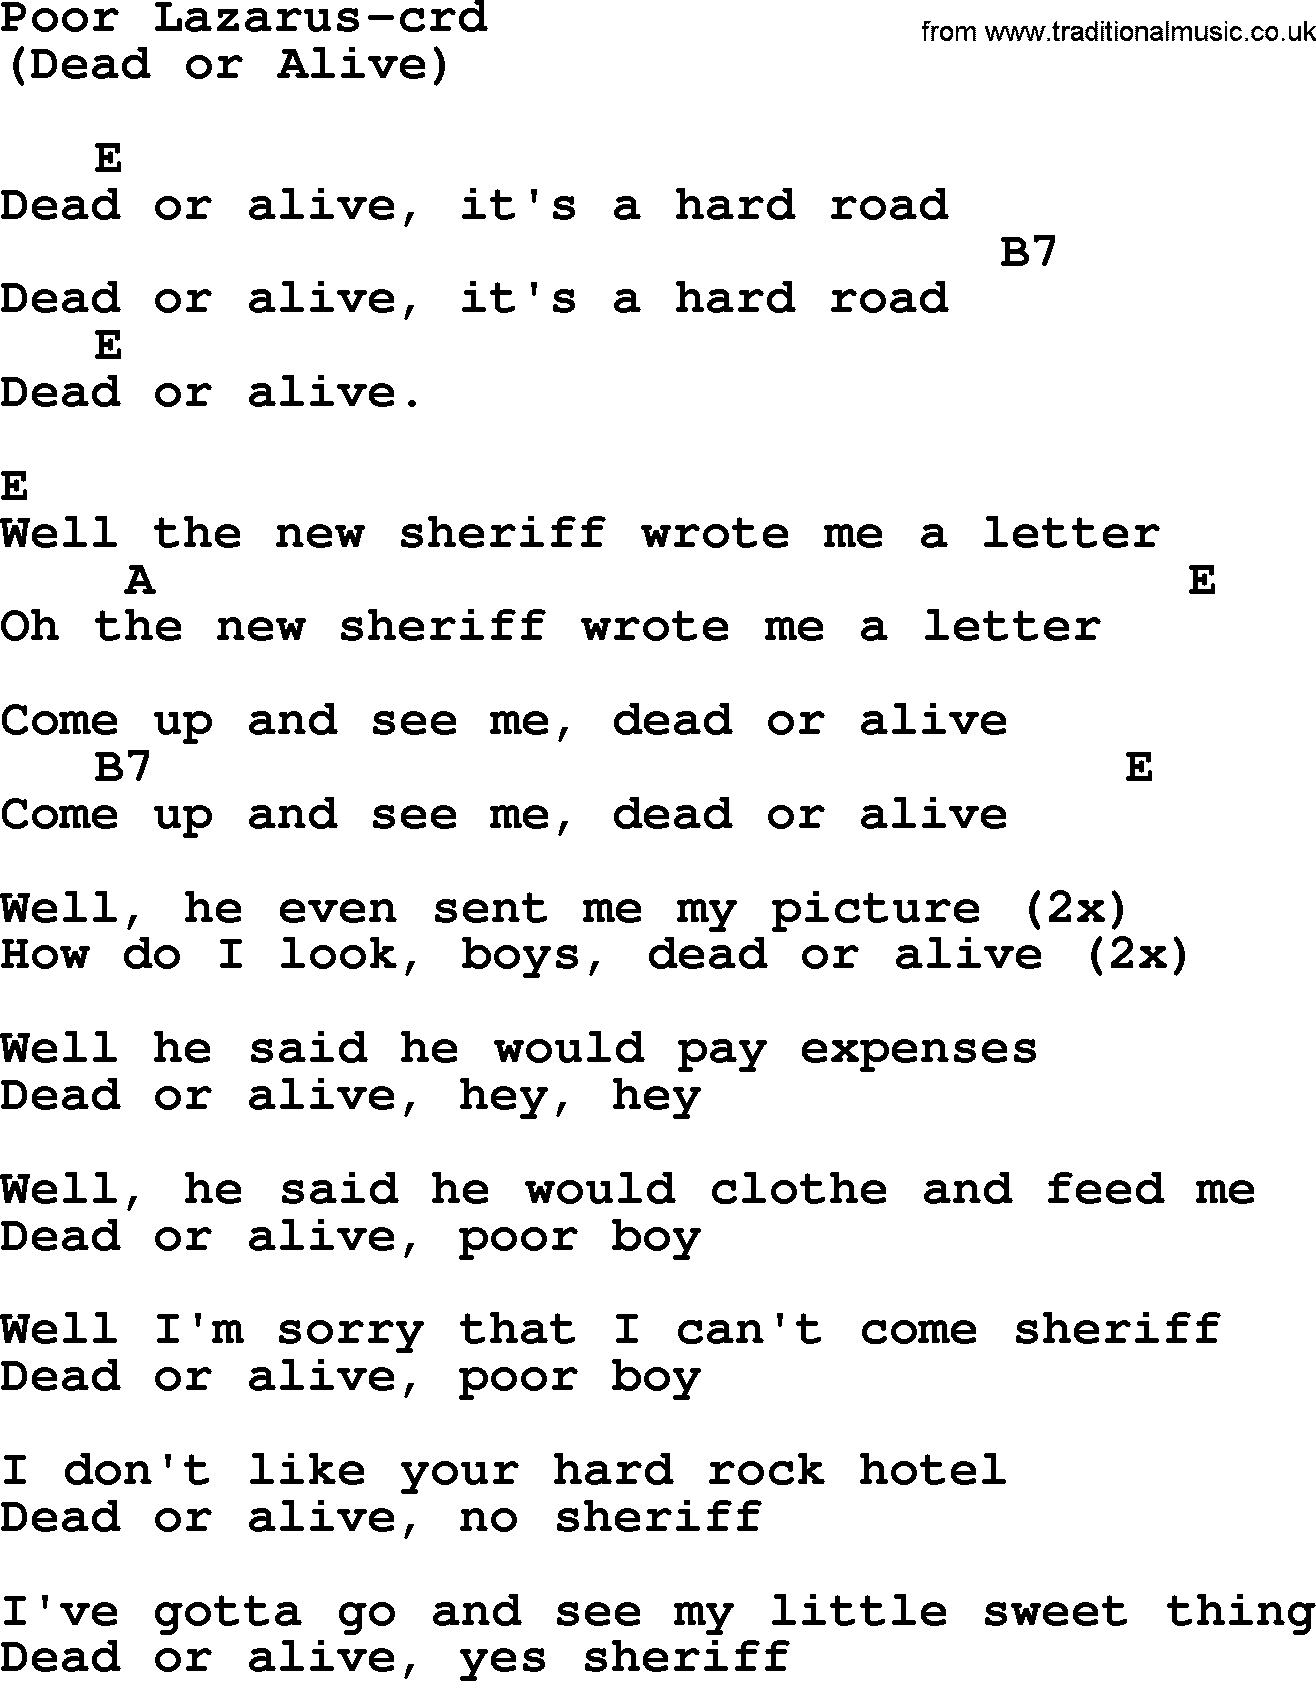 Woody Guthrie song Poor Lazarus lyrics and chords